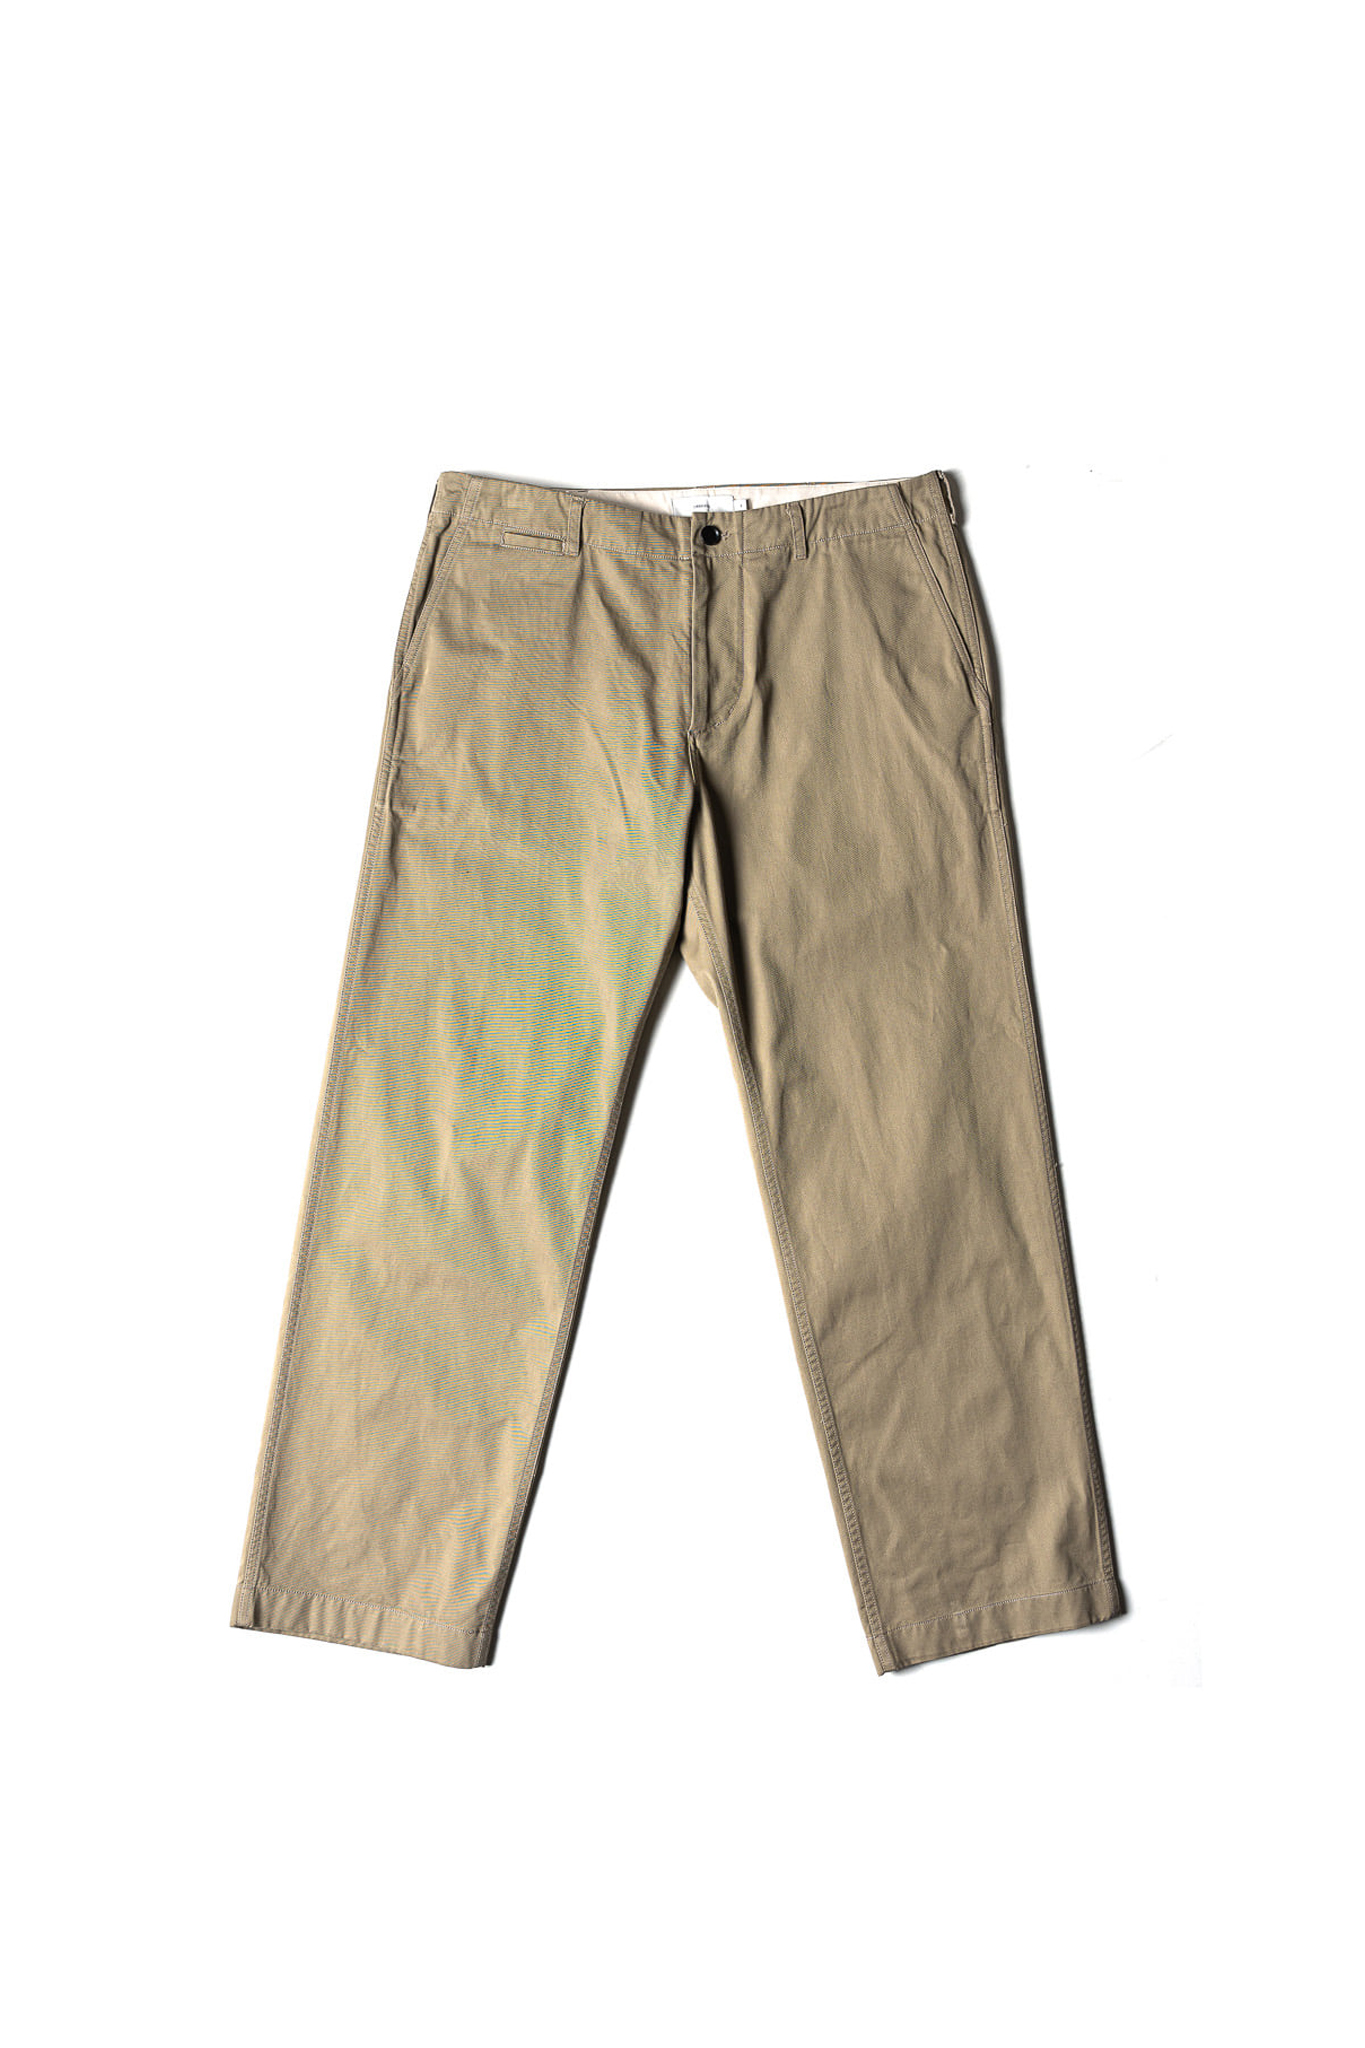 VINTAGE COTTON RELAXED CHINO PANTS - BEIGE